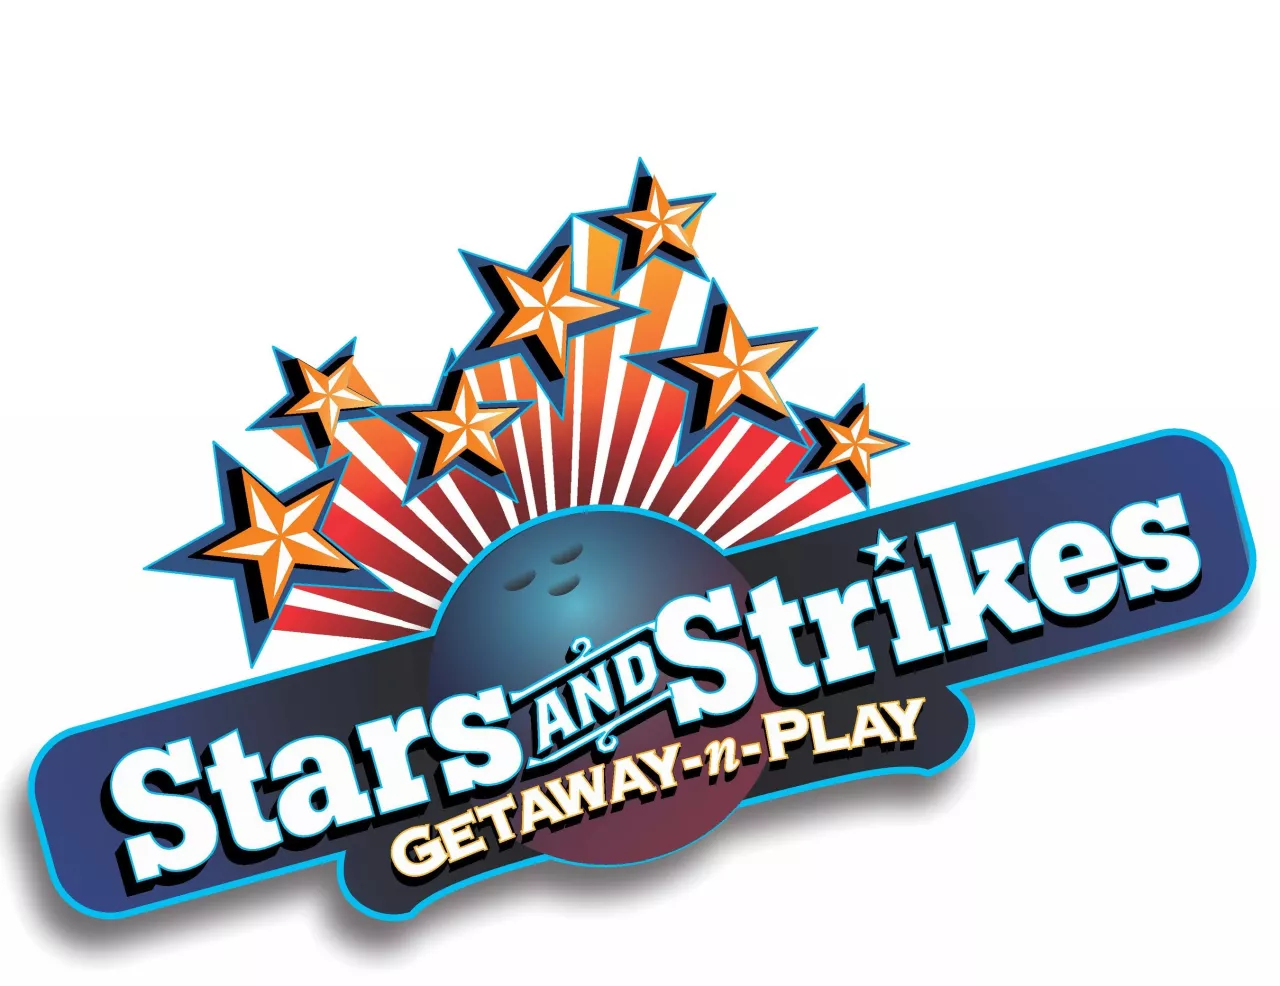 STARS AND STRIKES SUMMERVILLE EXPANDS THEIR ARCADE img#1